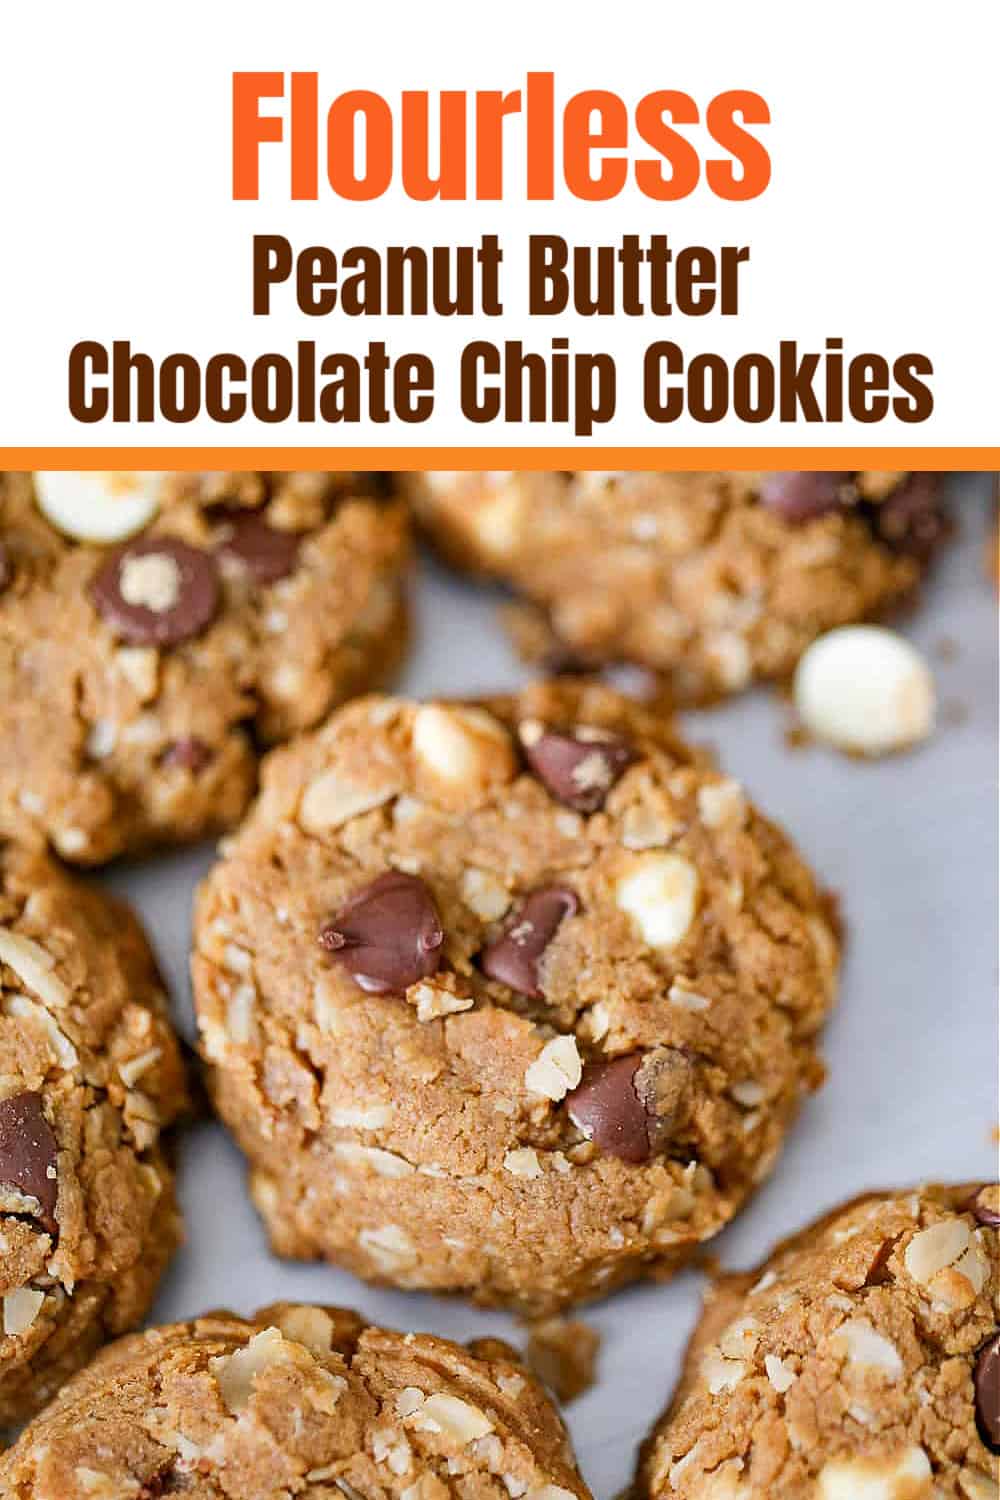 Healthy Peanut Butter Chocolate Chip Cookies - The Baking ChocolaTess